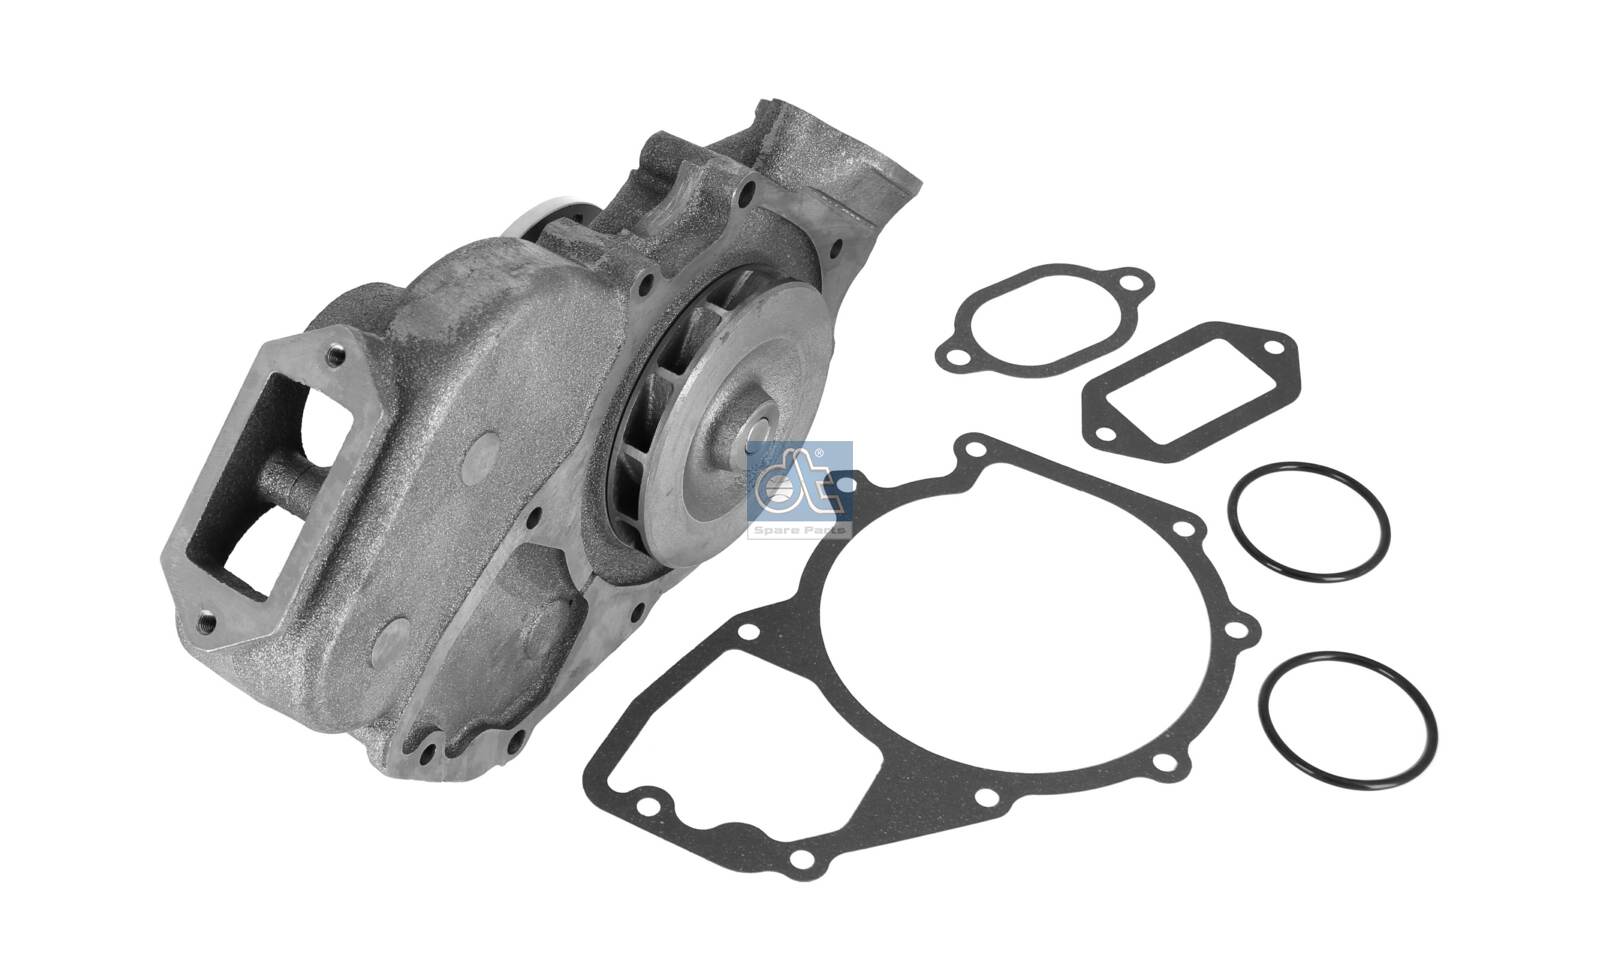 4.62589, Water Pump, engine cooling, DT Spare Parts, 4422000401, 4422010501, 4572000901, 4572001001, 4572001801, 4572002401, 4572010401, A4422000401, A4422010501, A4572000901, A4572001001, A4572001801, A4572002401, A4572010401, 010.722-00A, 01100021, 01.19.232, 012000457004, 0330200061, 08.120.1960.150, 12380130, 20160345705, 20200183, 2201057, 24-1327, 28626, 350680, 57676, 8MP376809-024, CP518000S